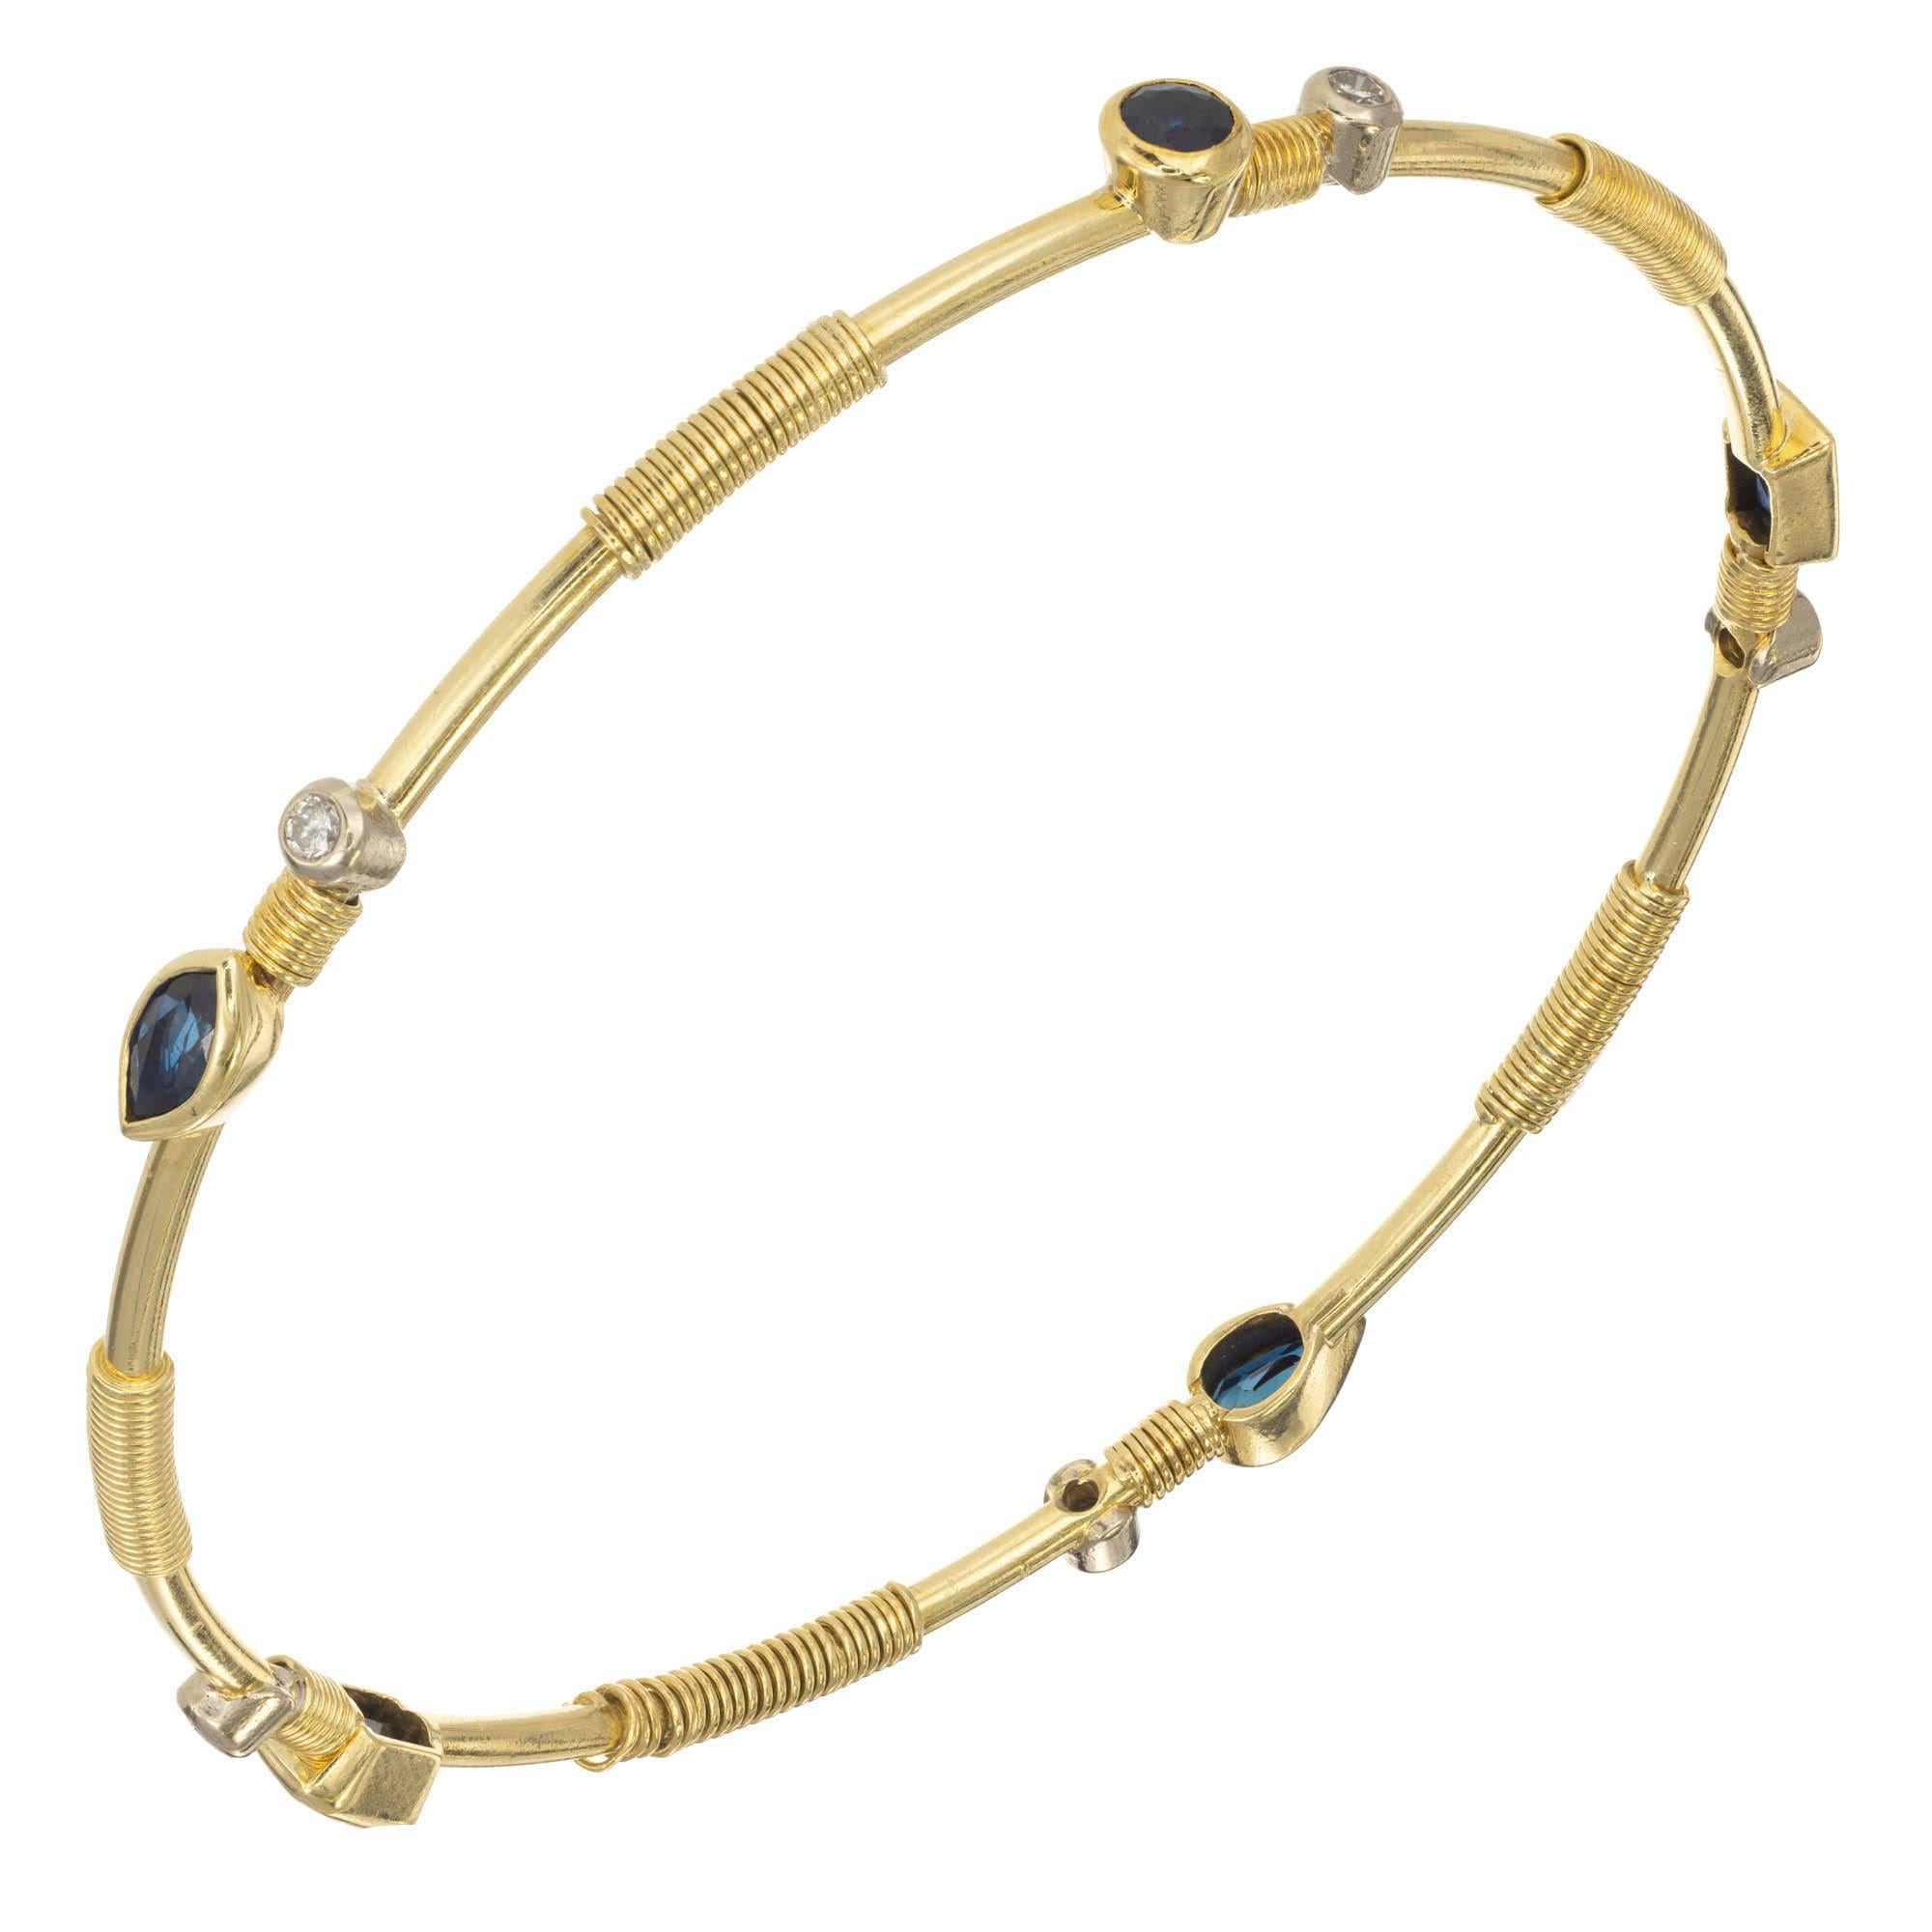 1.79 Carat Sapphire Diamond Yellow Gold Bangle Bracelet In Good Condition For Sale In Stamford, CT